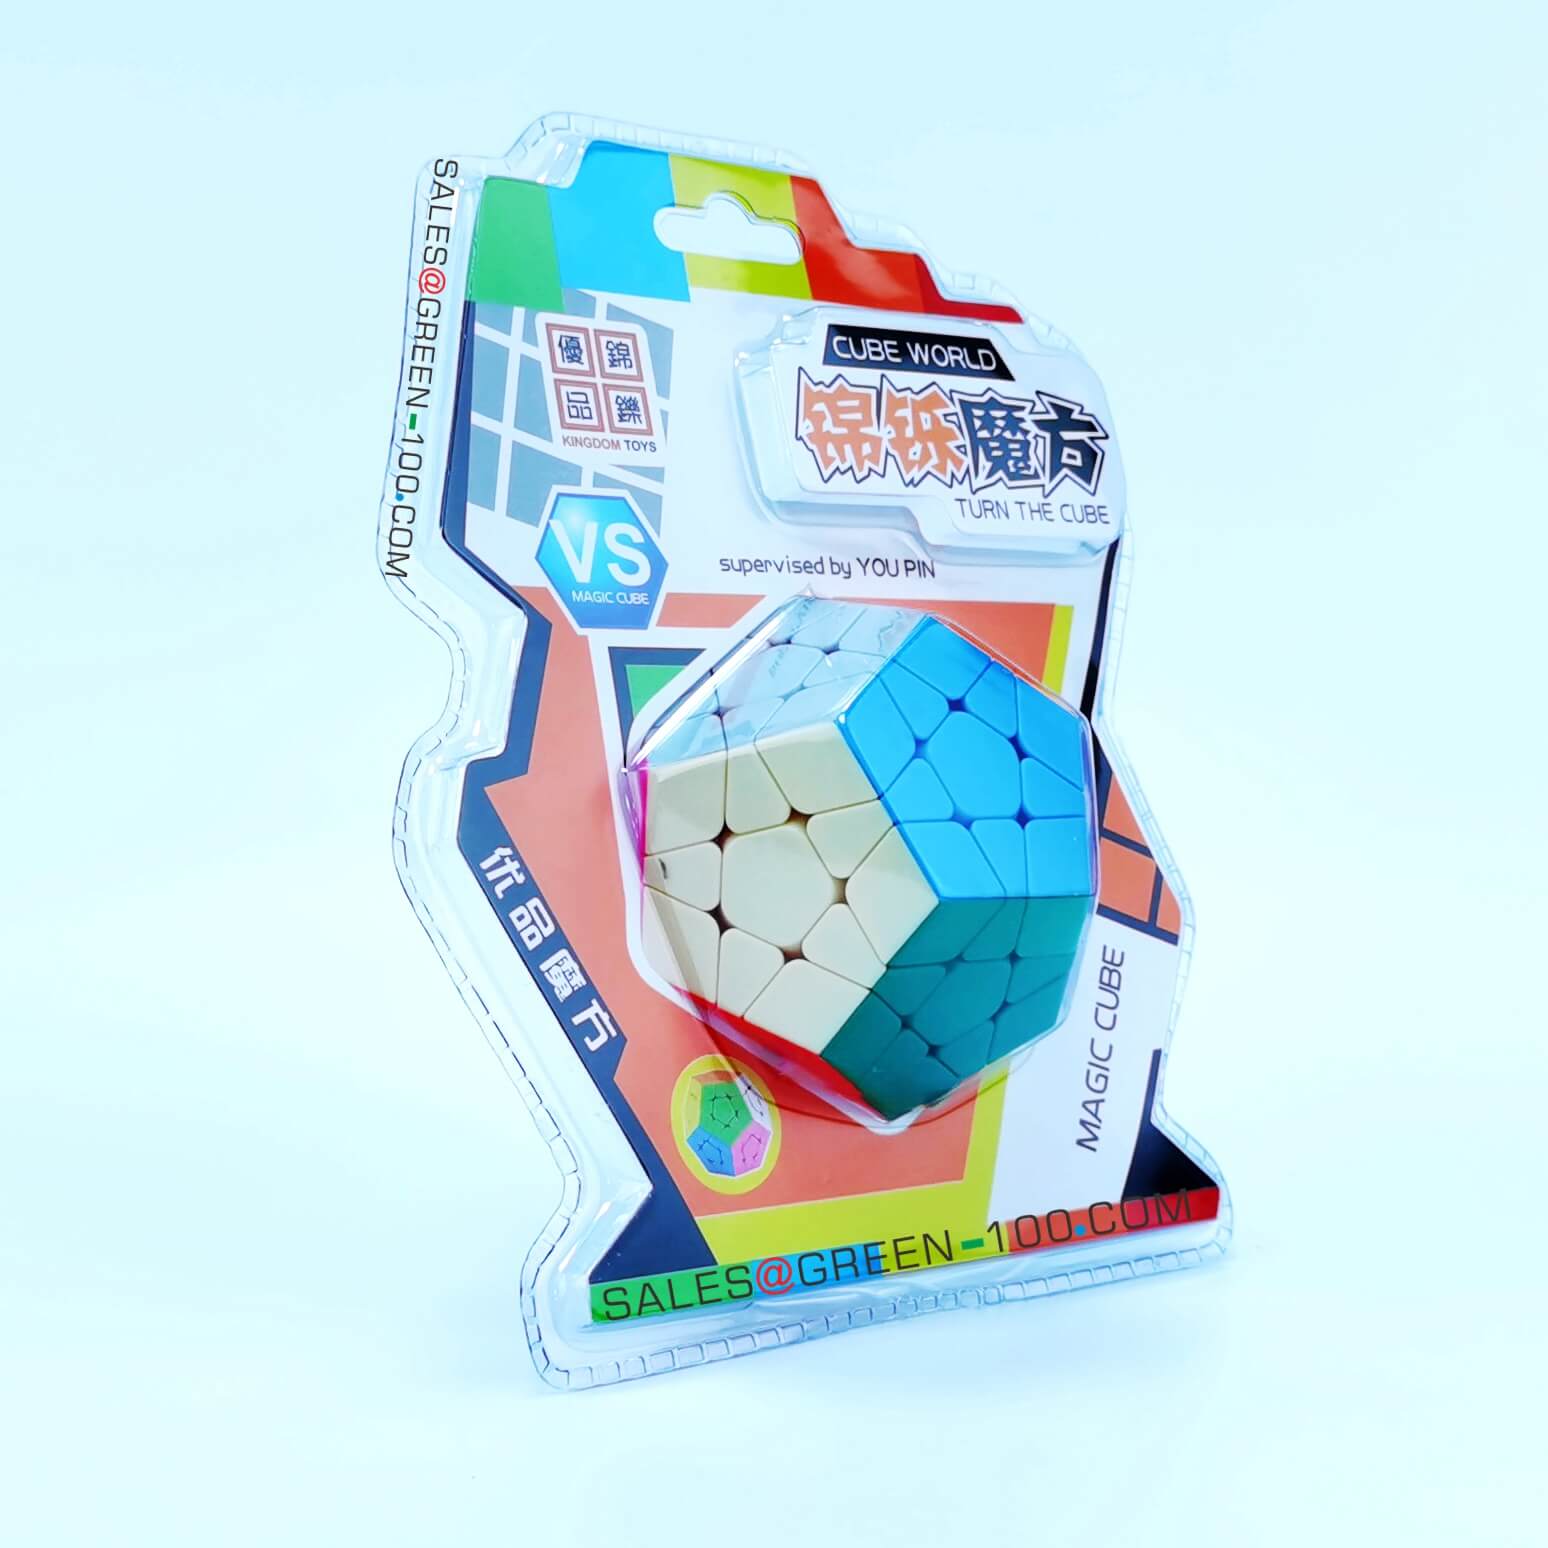 rubik's cube packaging manufacturers in china